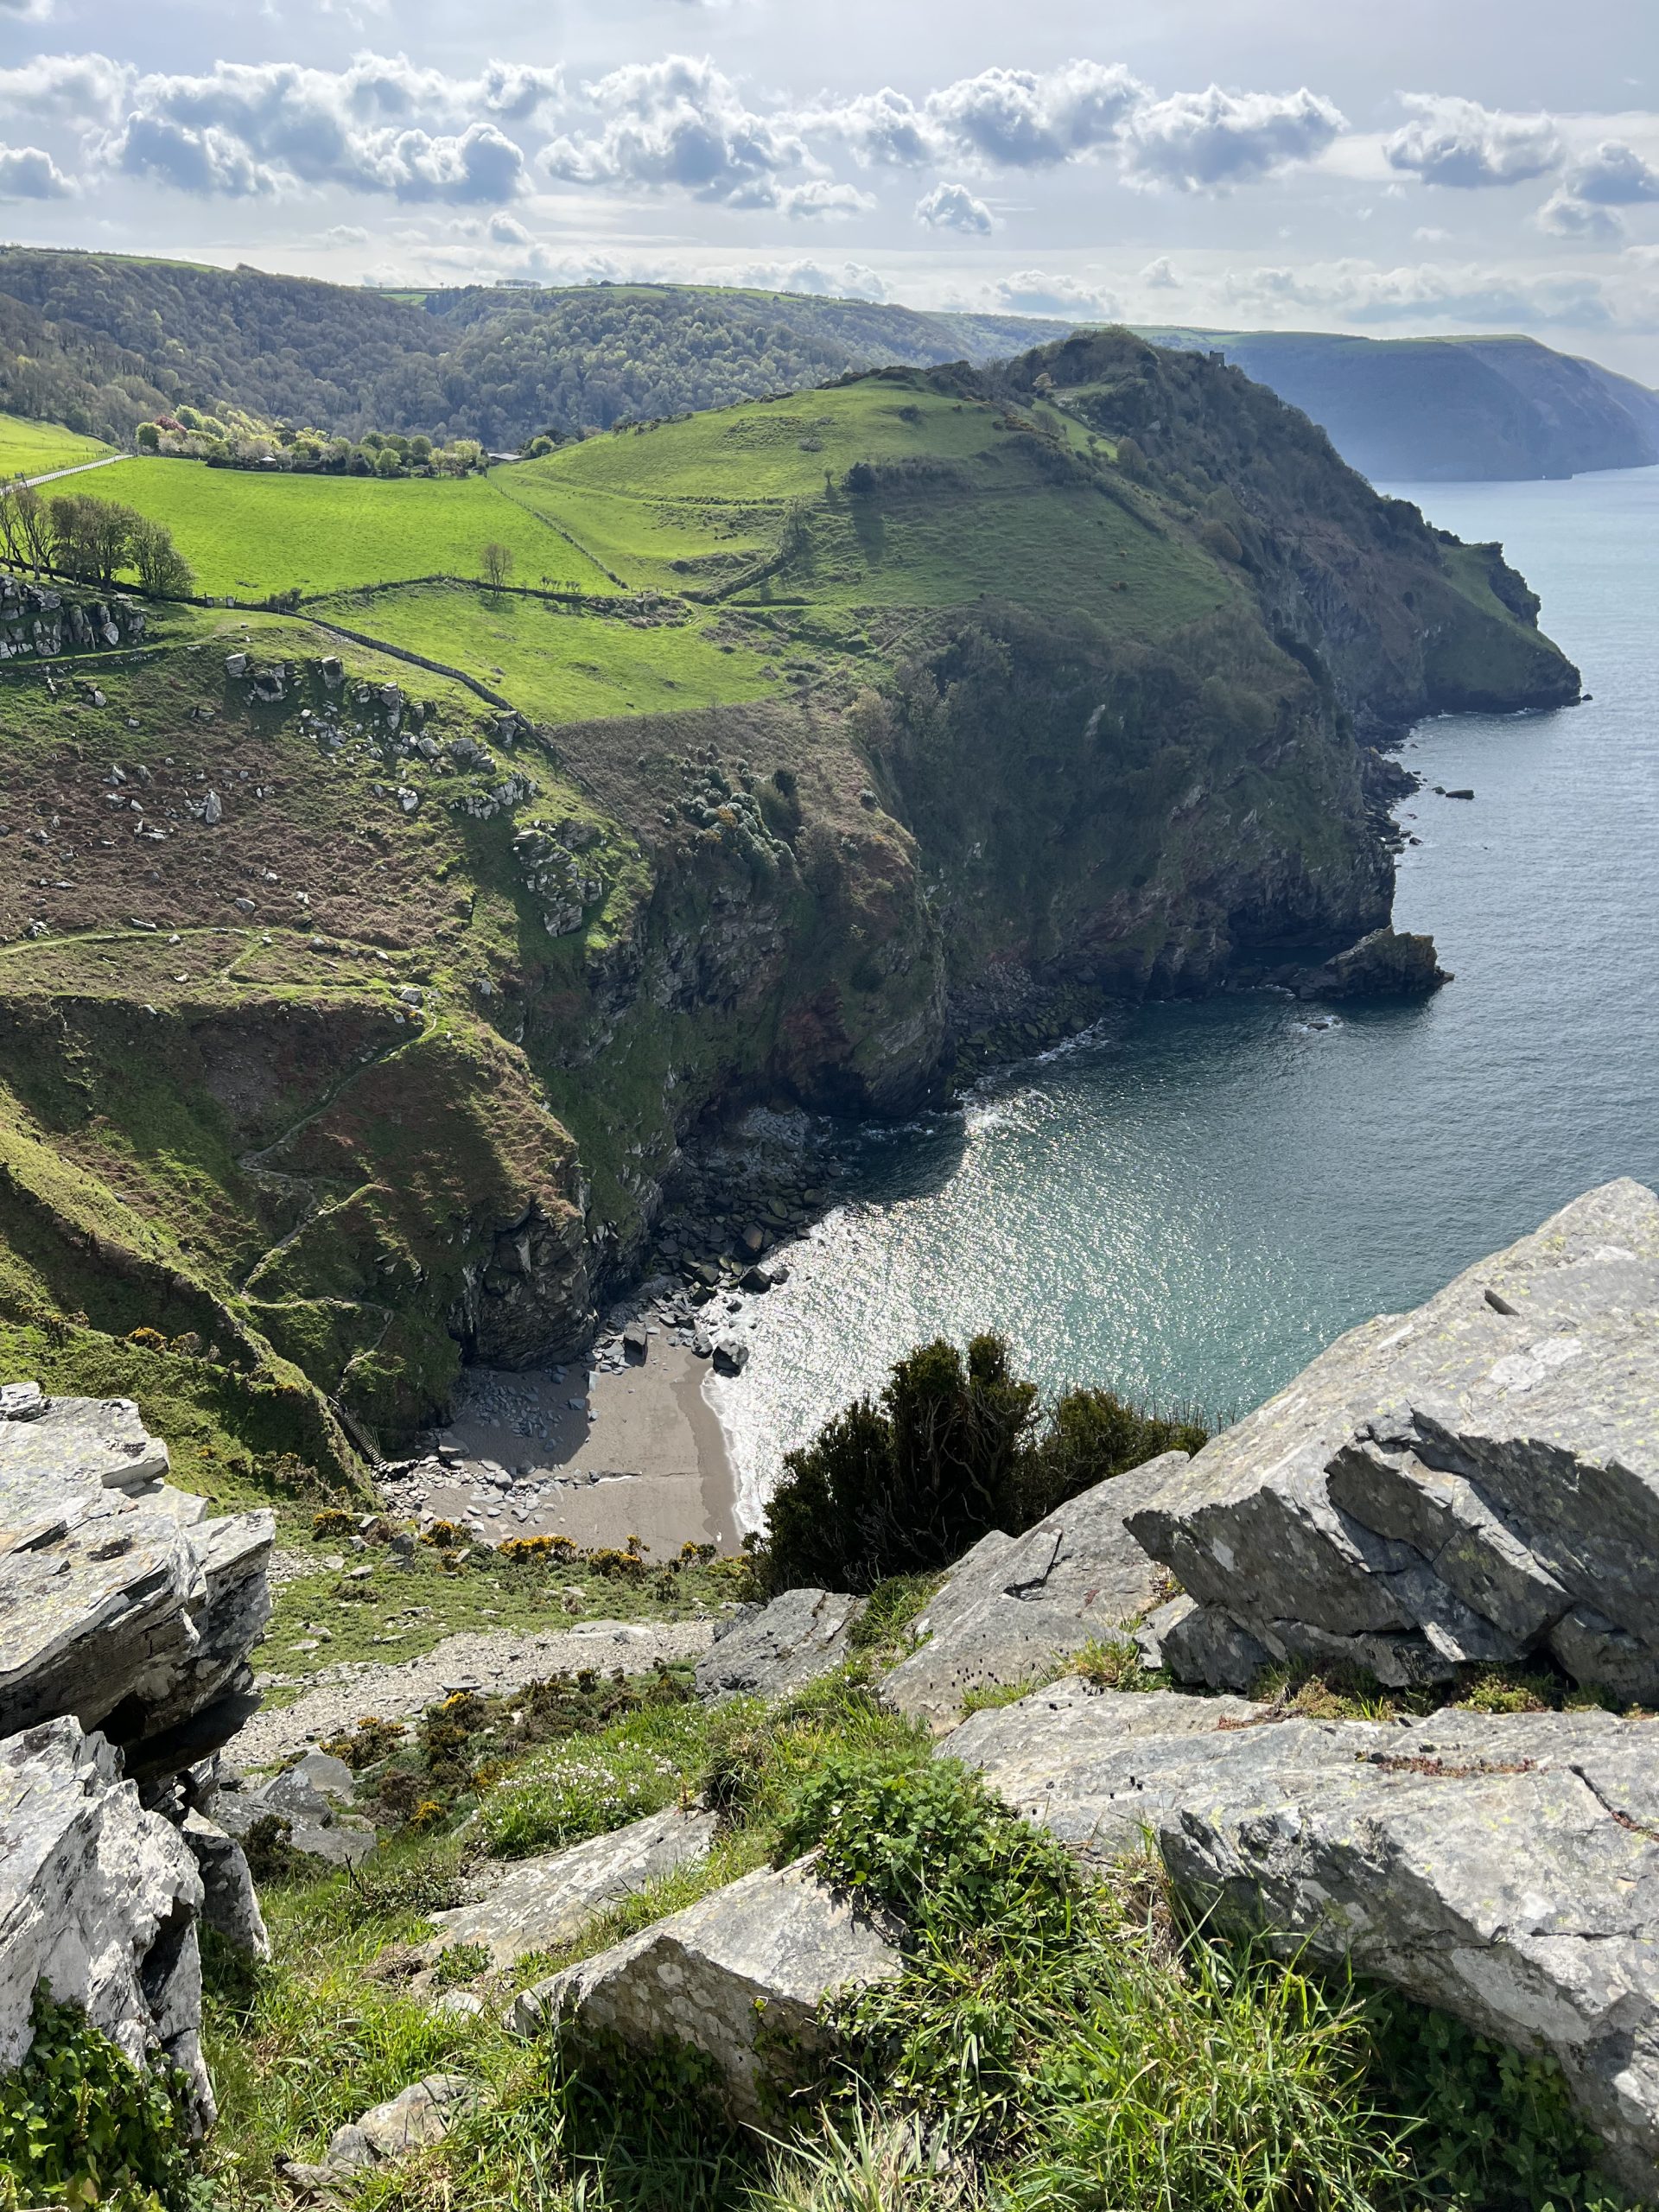 A stunning photo of Wringcliff Bay, Exmoor from up on the cliffs with the sea and the beach below